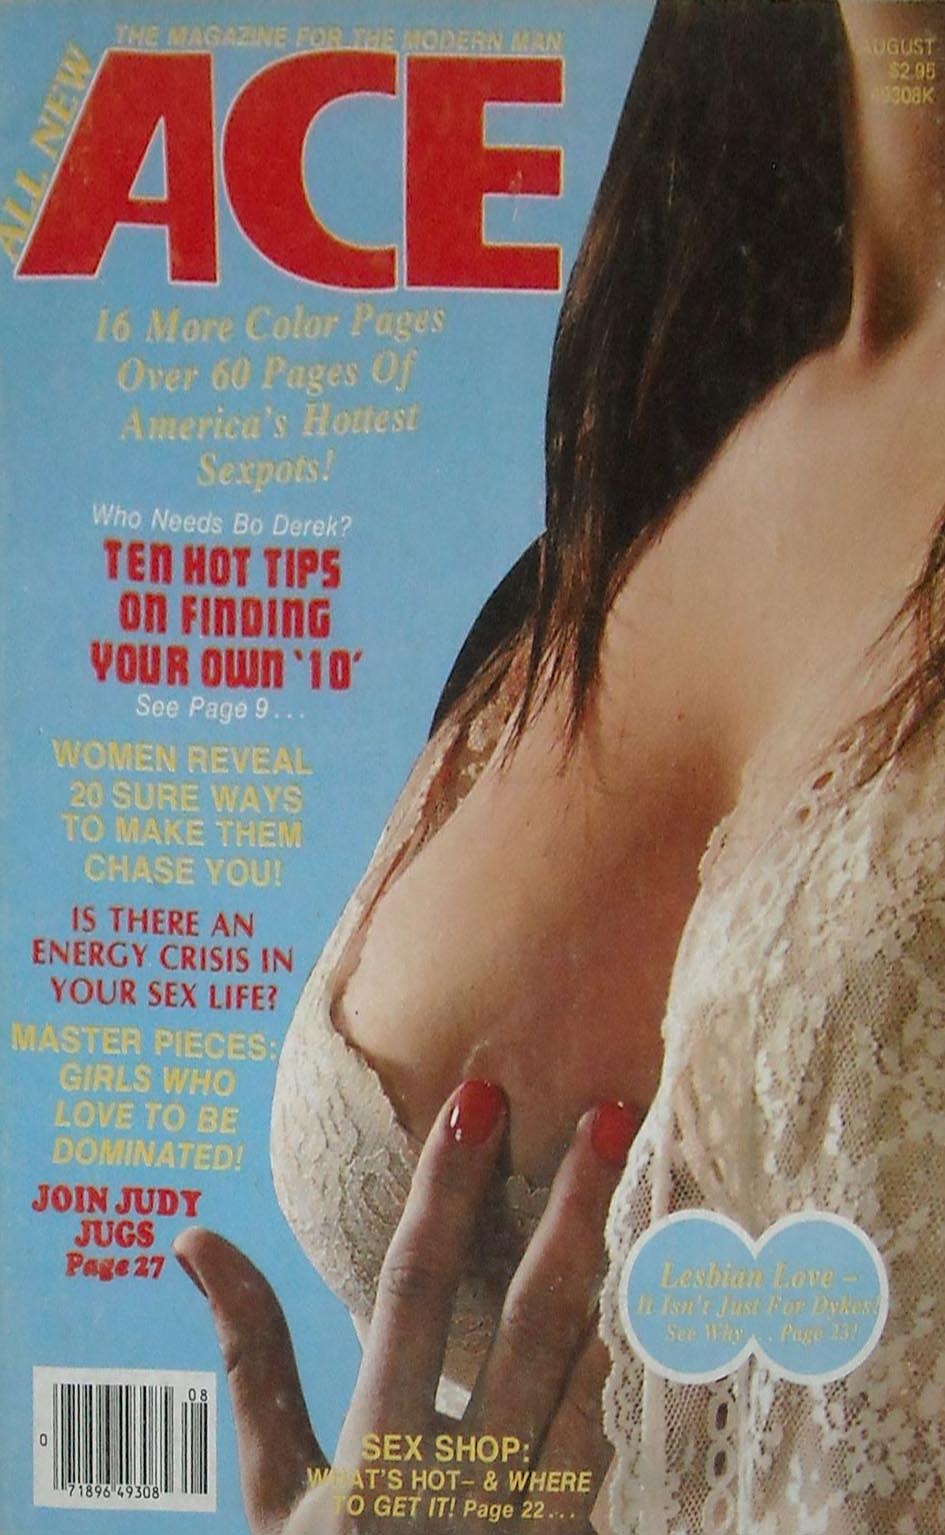 Ace August 1980 magazine back issue Ace magizine back copy Ace August 1980 Pulp Fiction Magazine Back Issue Published by A A Wyns Magazine Publishers. 16 More Color Pages Over 60 Pages Of America's Hottest Sexpots!.